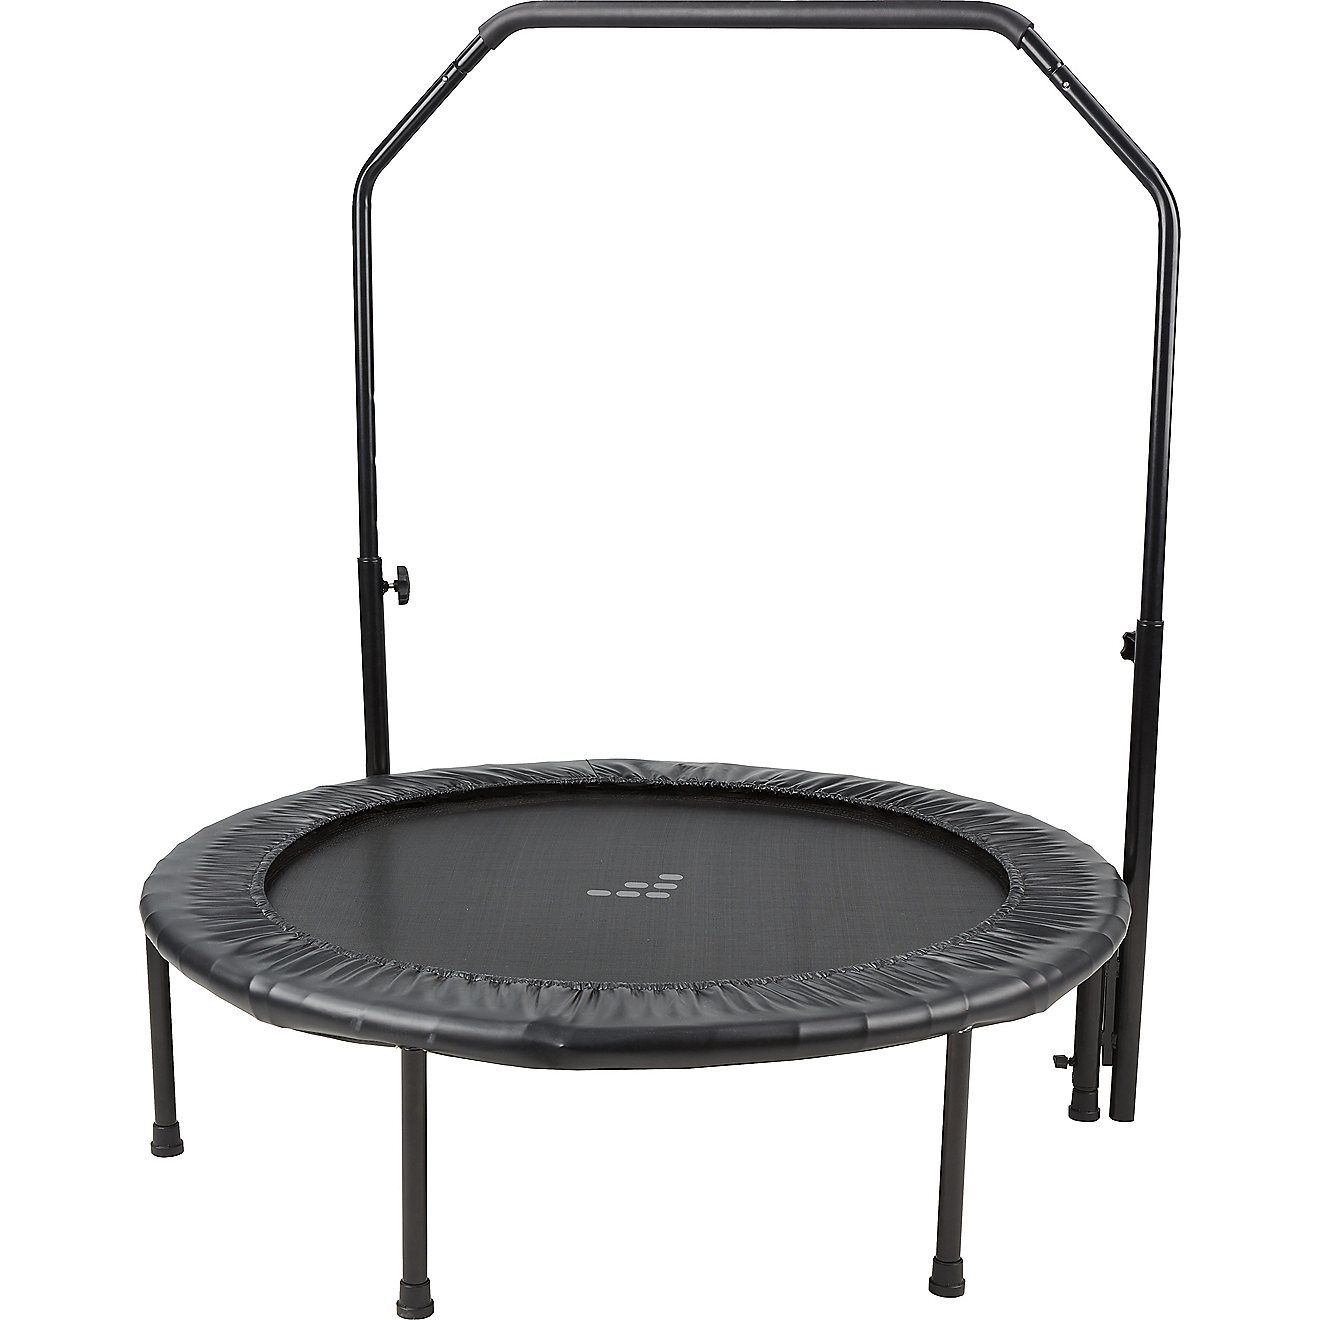 BCG 44 in Springless Round Aerobic Rebounder                                                                                     - view number 1